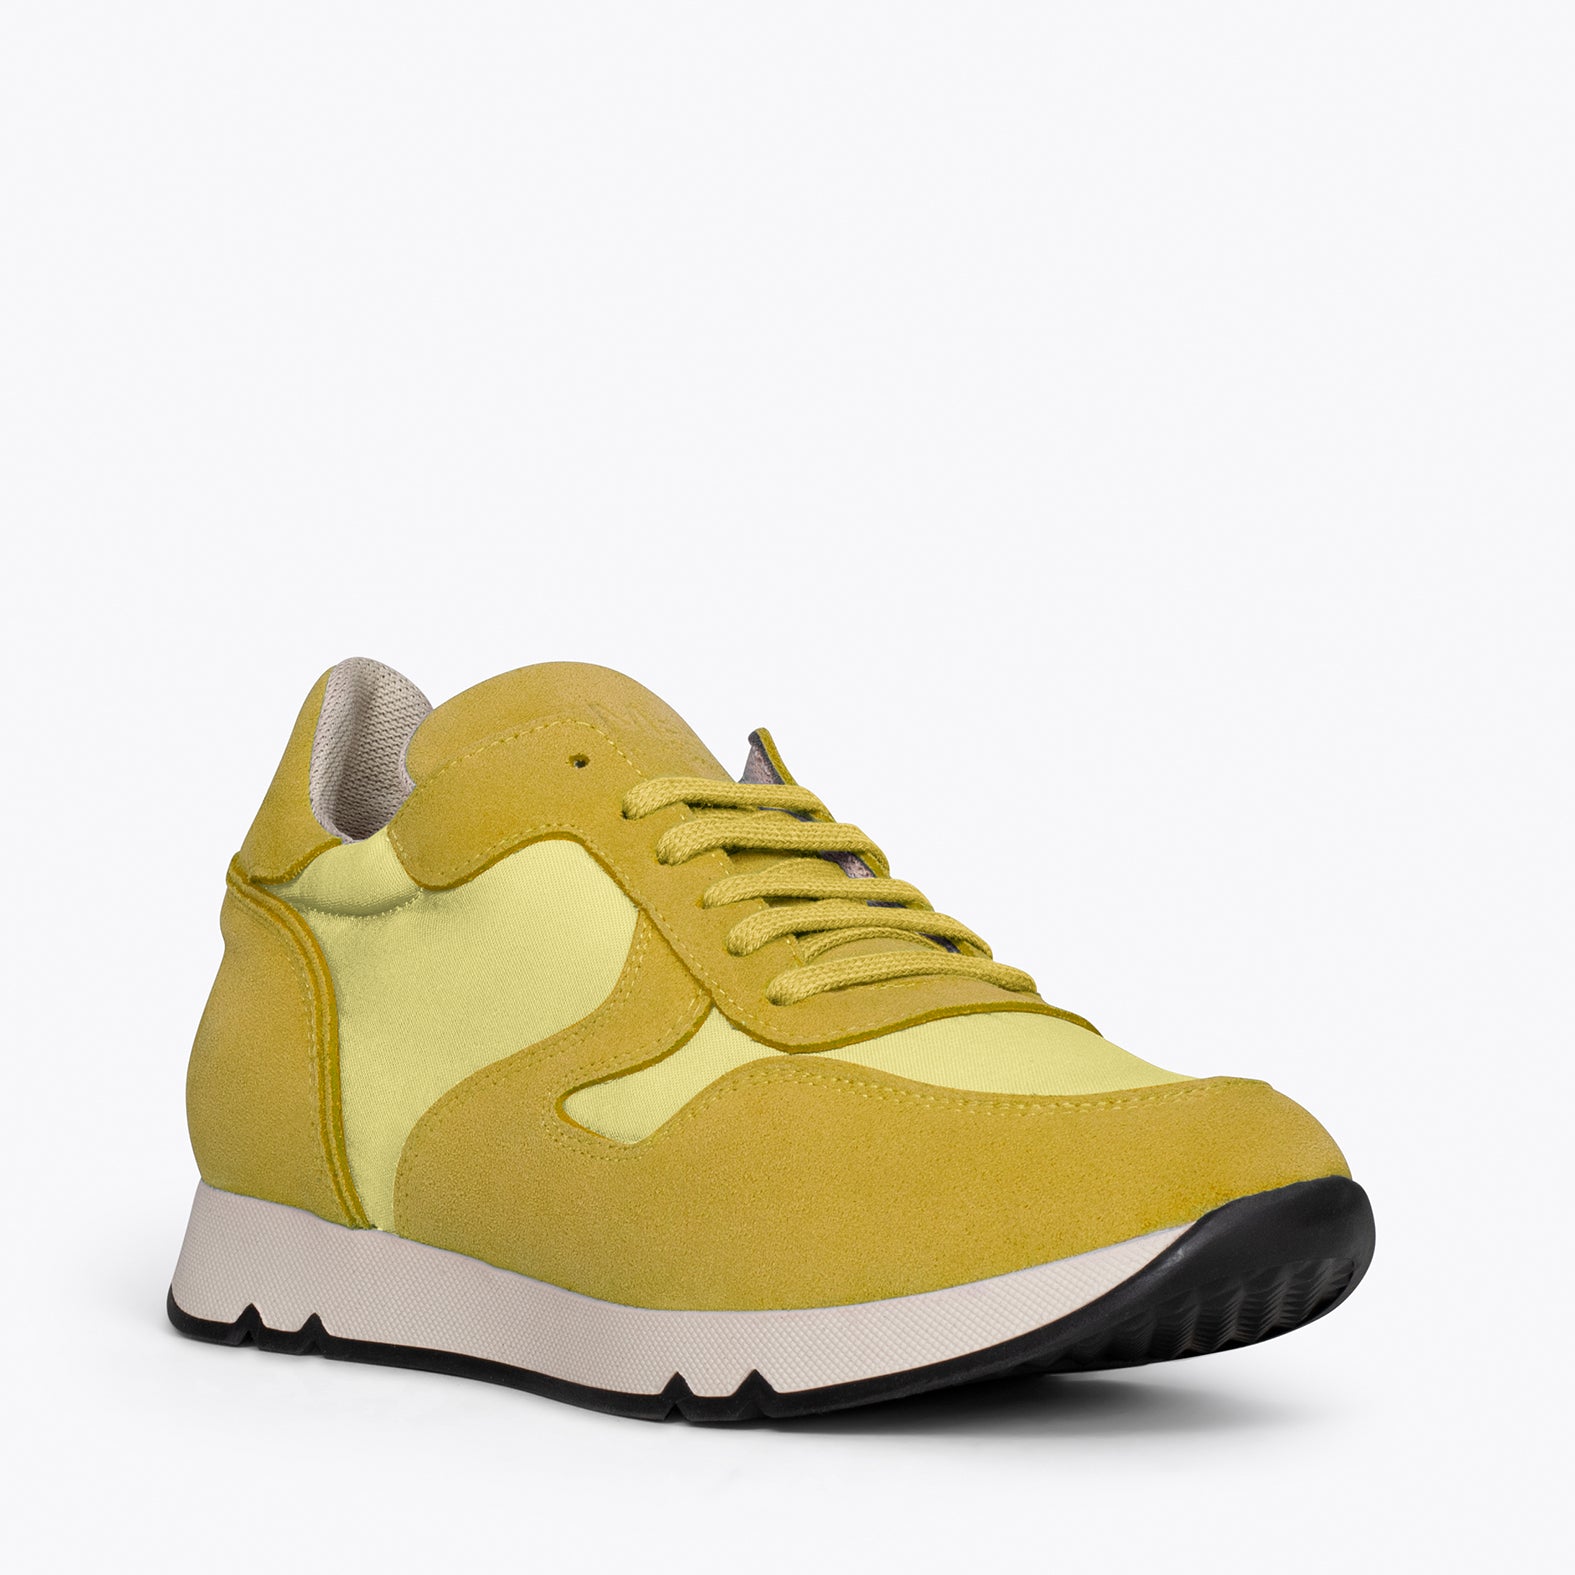 SPORTS – YELLOW sneakers for women